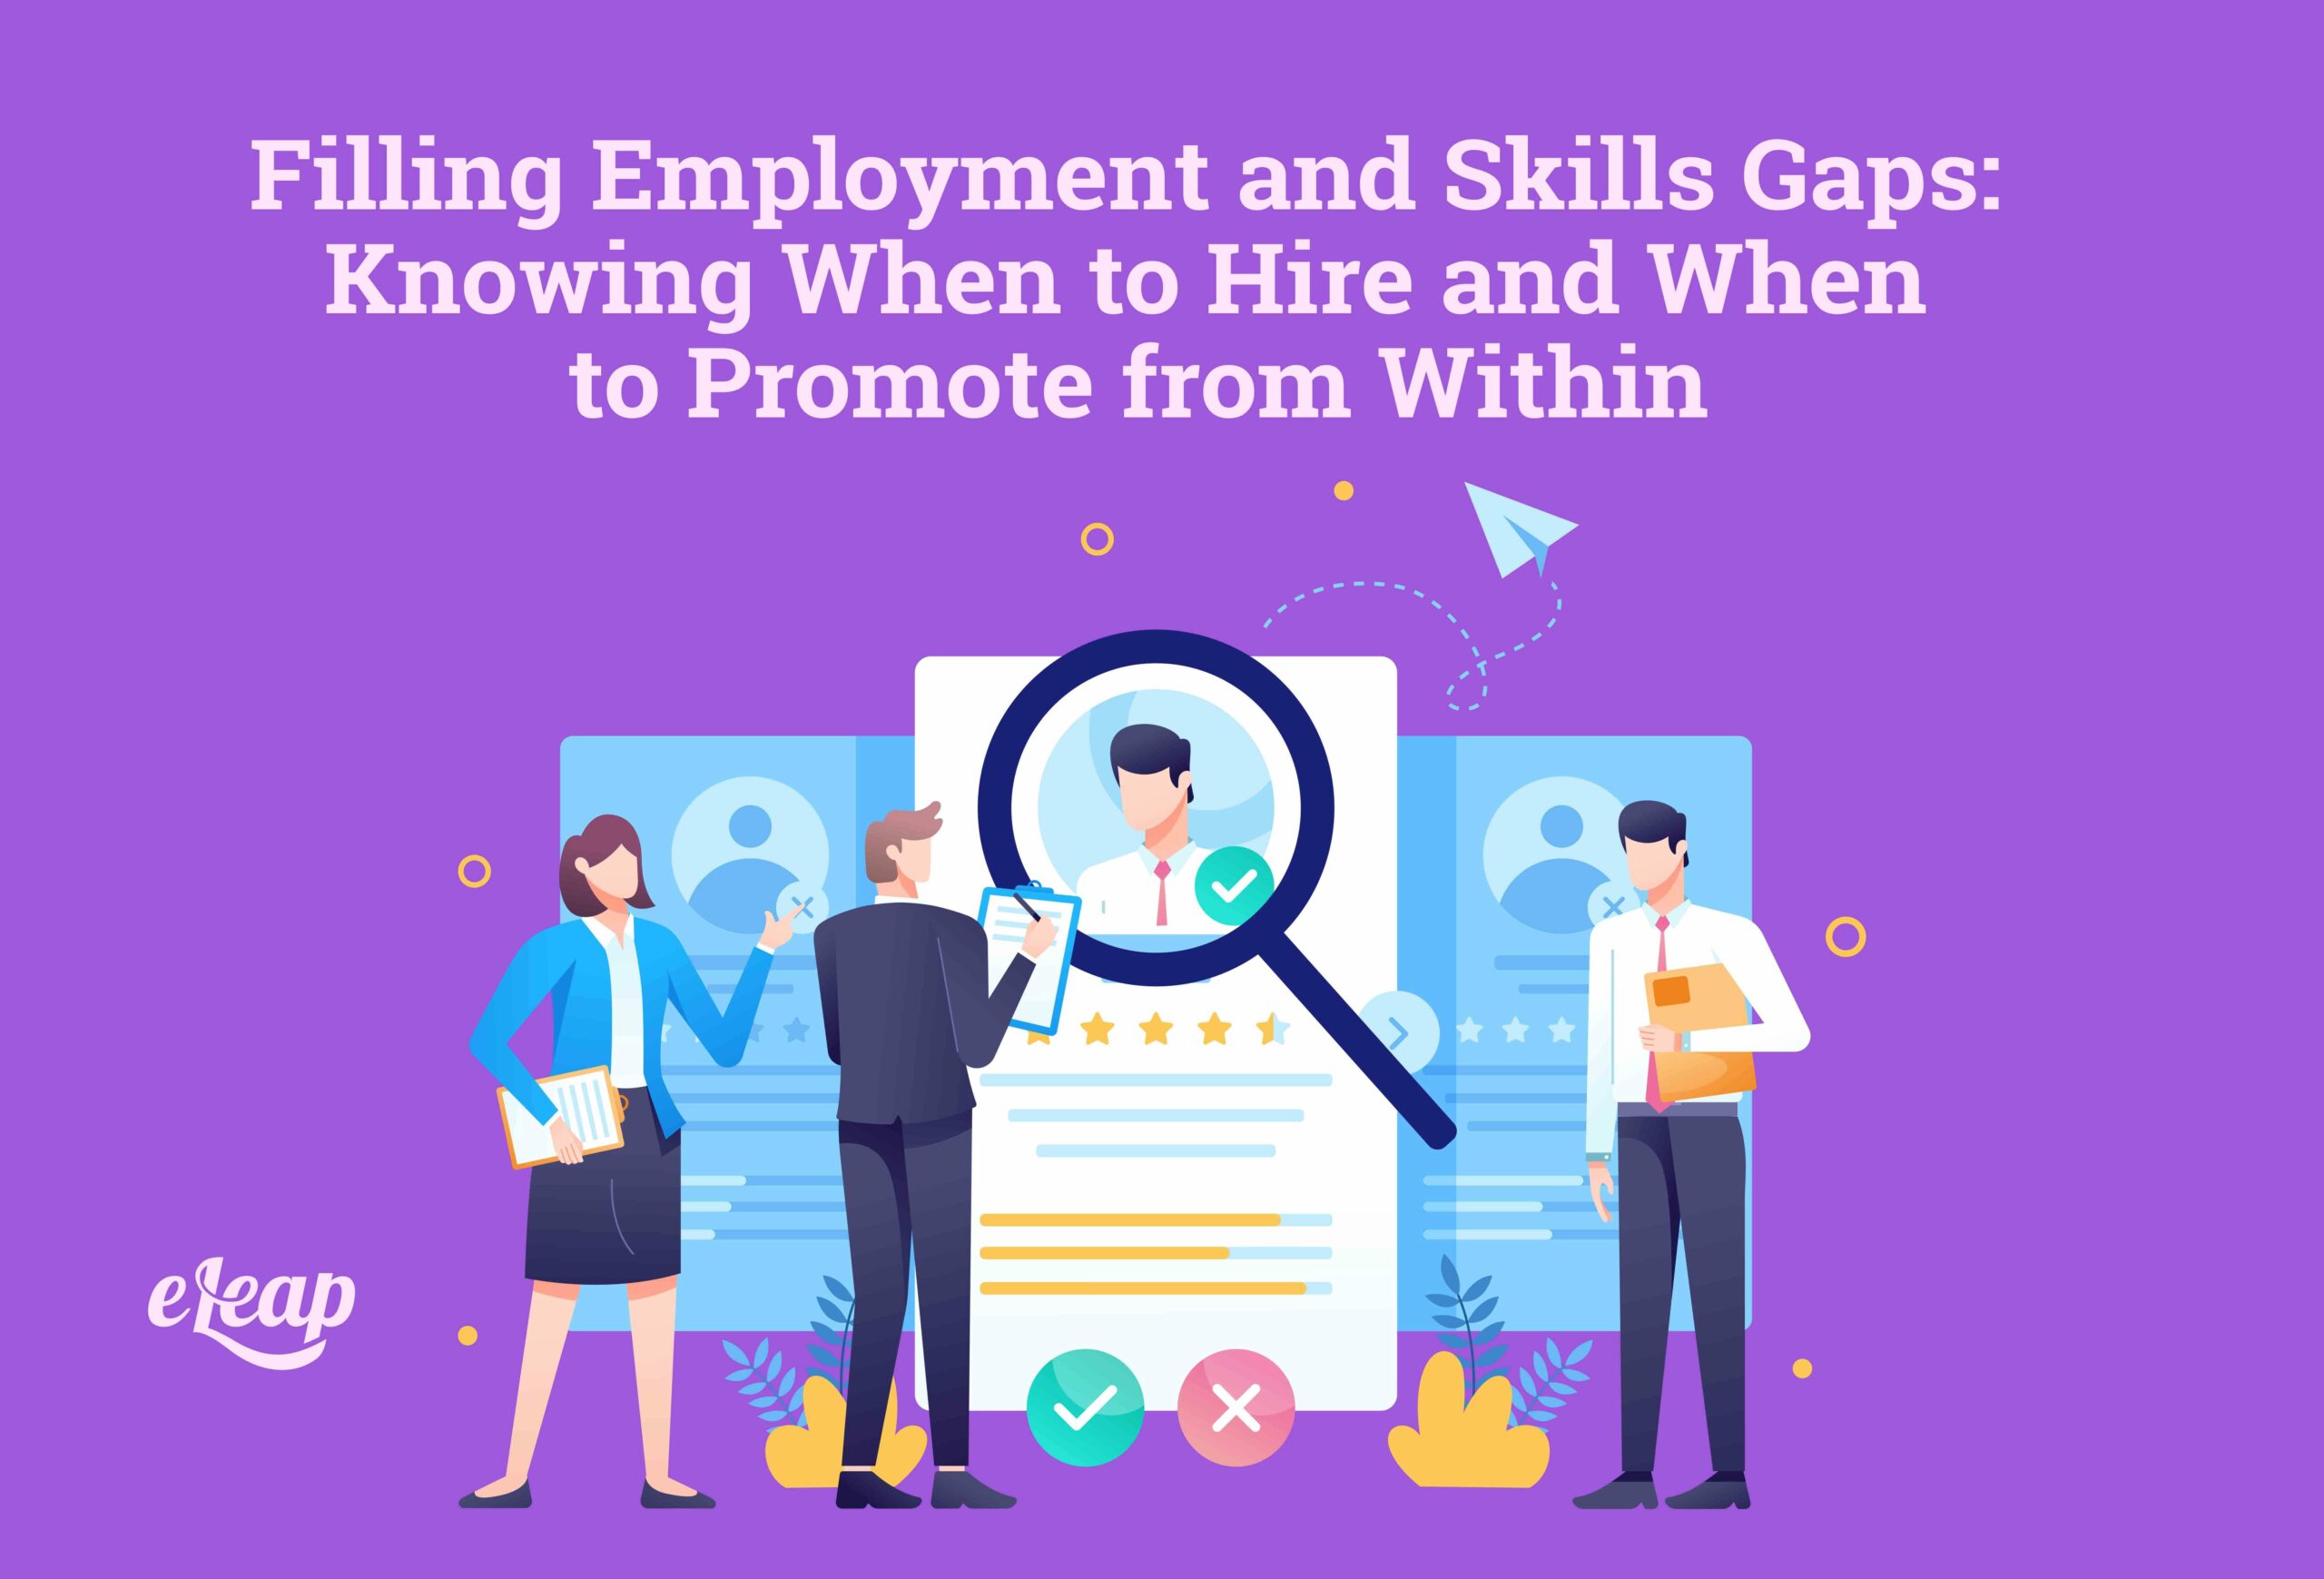 Filling Employment and Skills Gaps: Knowing When to Hire and When to Promote from Within